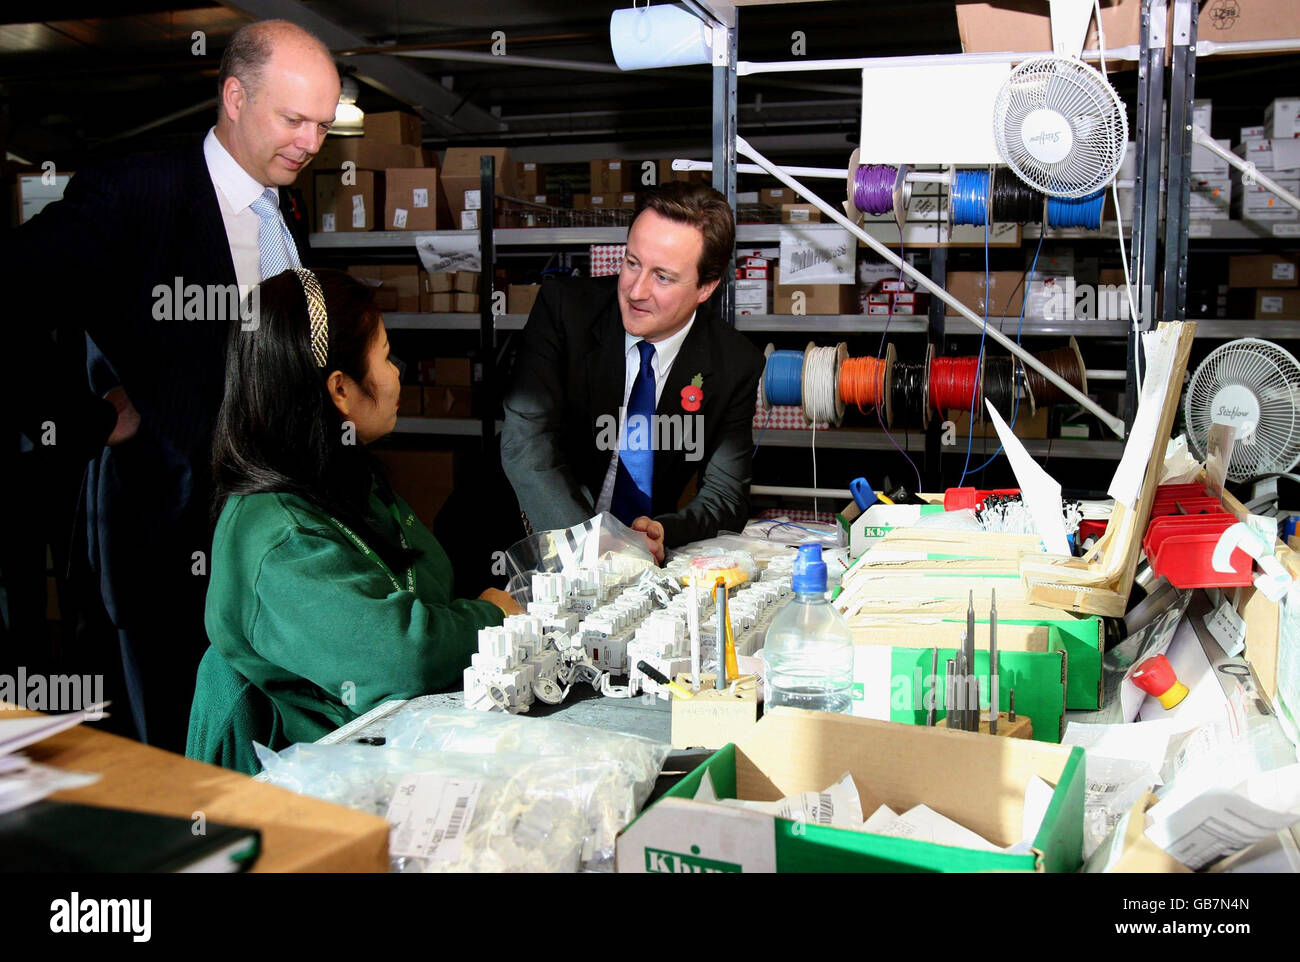 Shadow Work and Pensions secretary Chris Grayling (left) and Conservative Party leader David Cameron (right) chat to assembly technician, Noojan Humphries, during a visit to Routeco plc, in Milton Keynes. Stock Photo